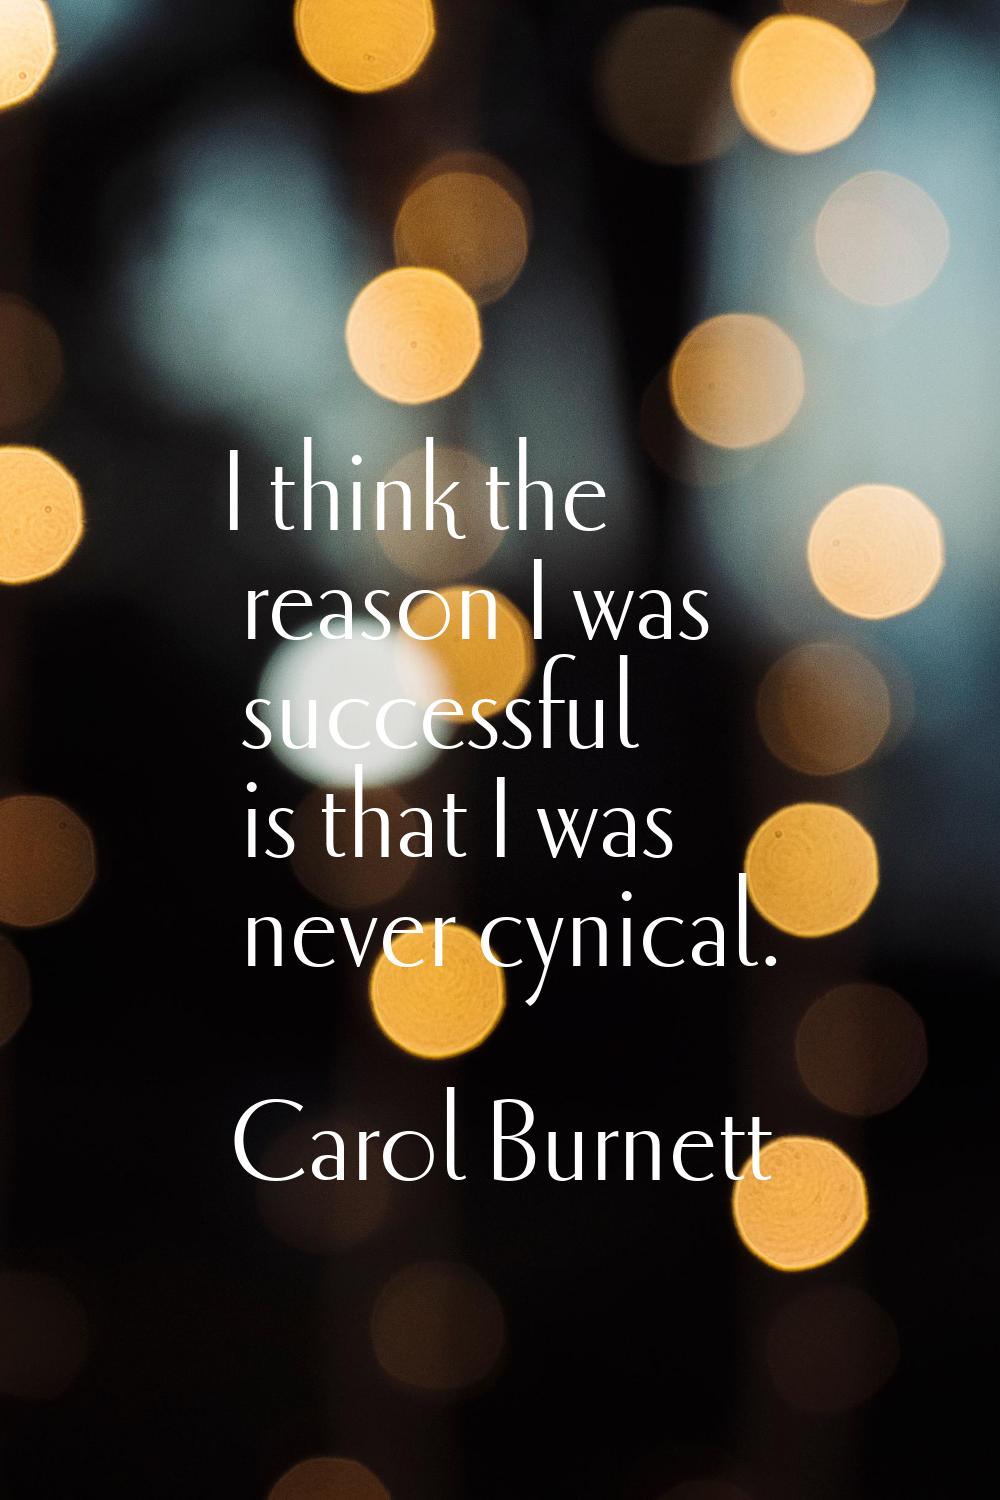 I think the reason I was successful is that I was never cynical.